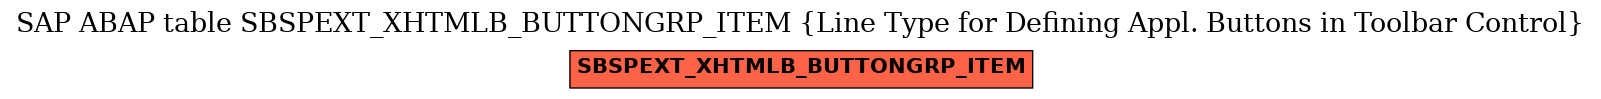 E-R Diagram for table SBSPEXT_XHTMLB_BUTTONGRP_ITEM (Line Type for Defining Appl. Buttons in Toolbar Control)